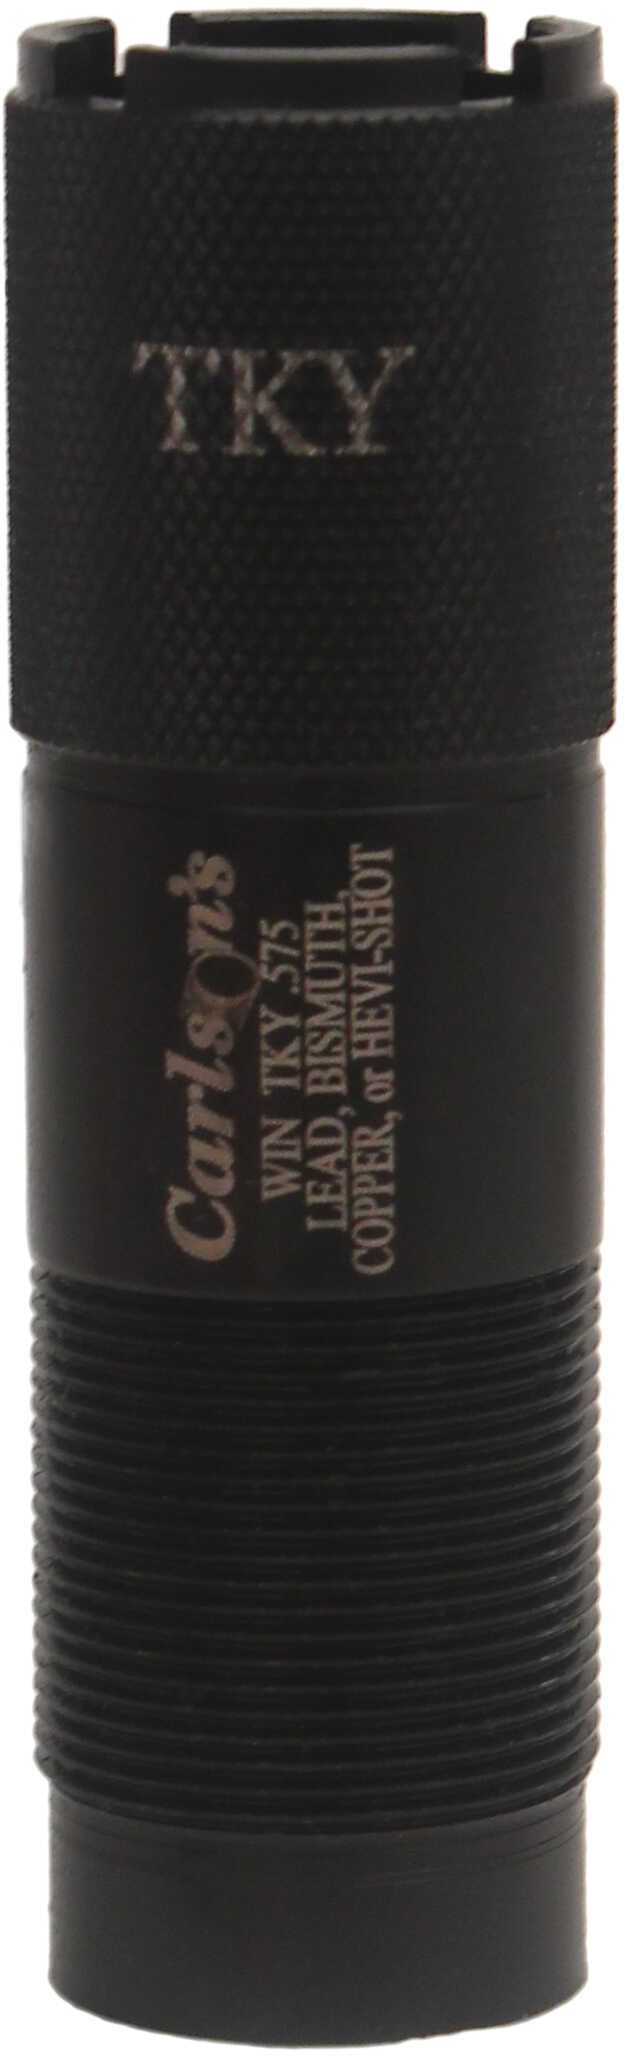 Carlsons Winchester/Mossberg/Browning/Weatherby Choke Tubes Extended Turkey, 20 Gauge .575 10300